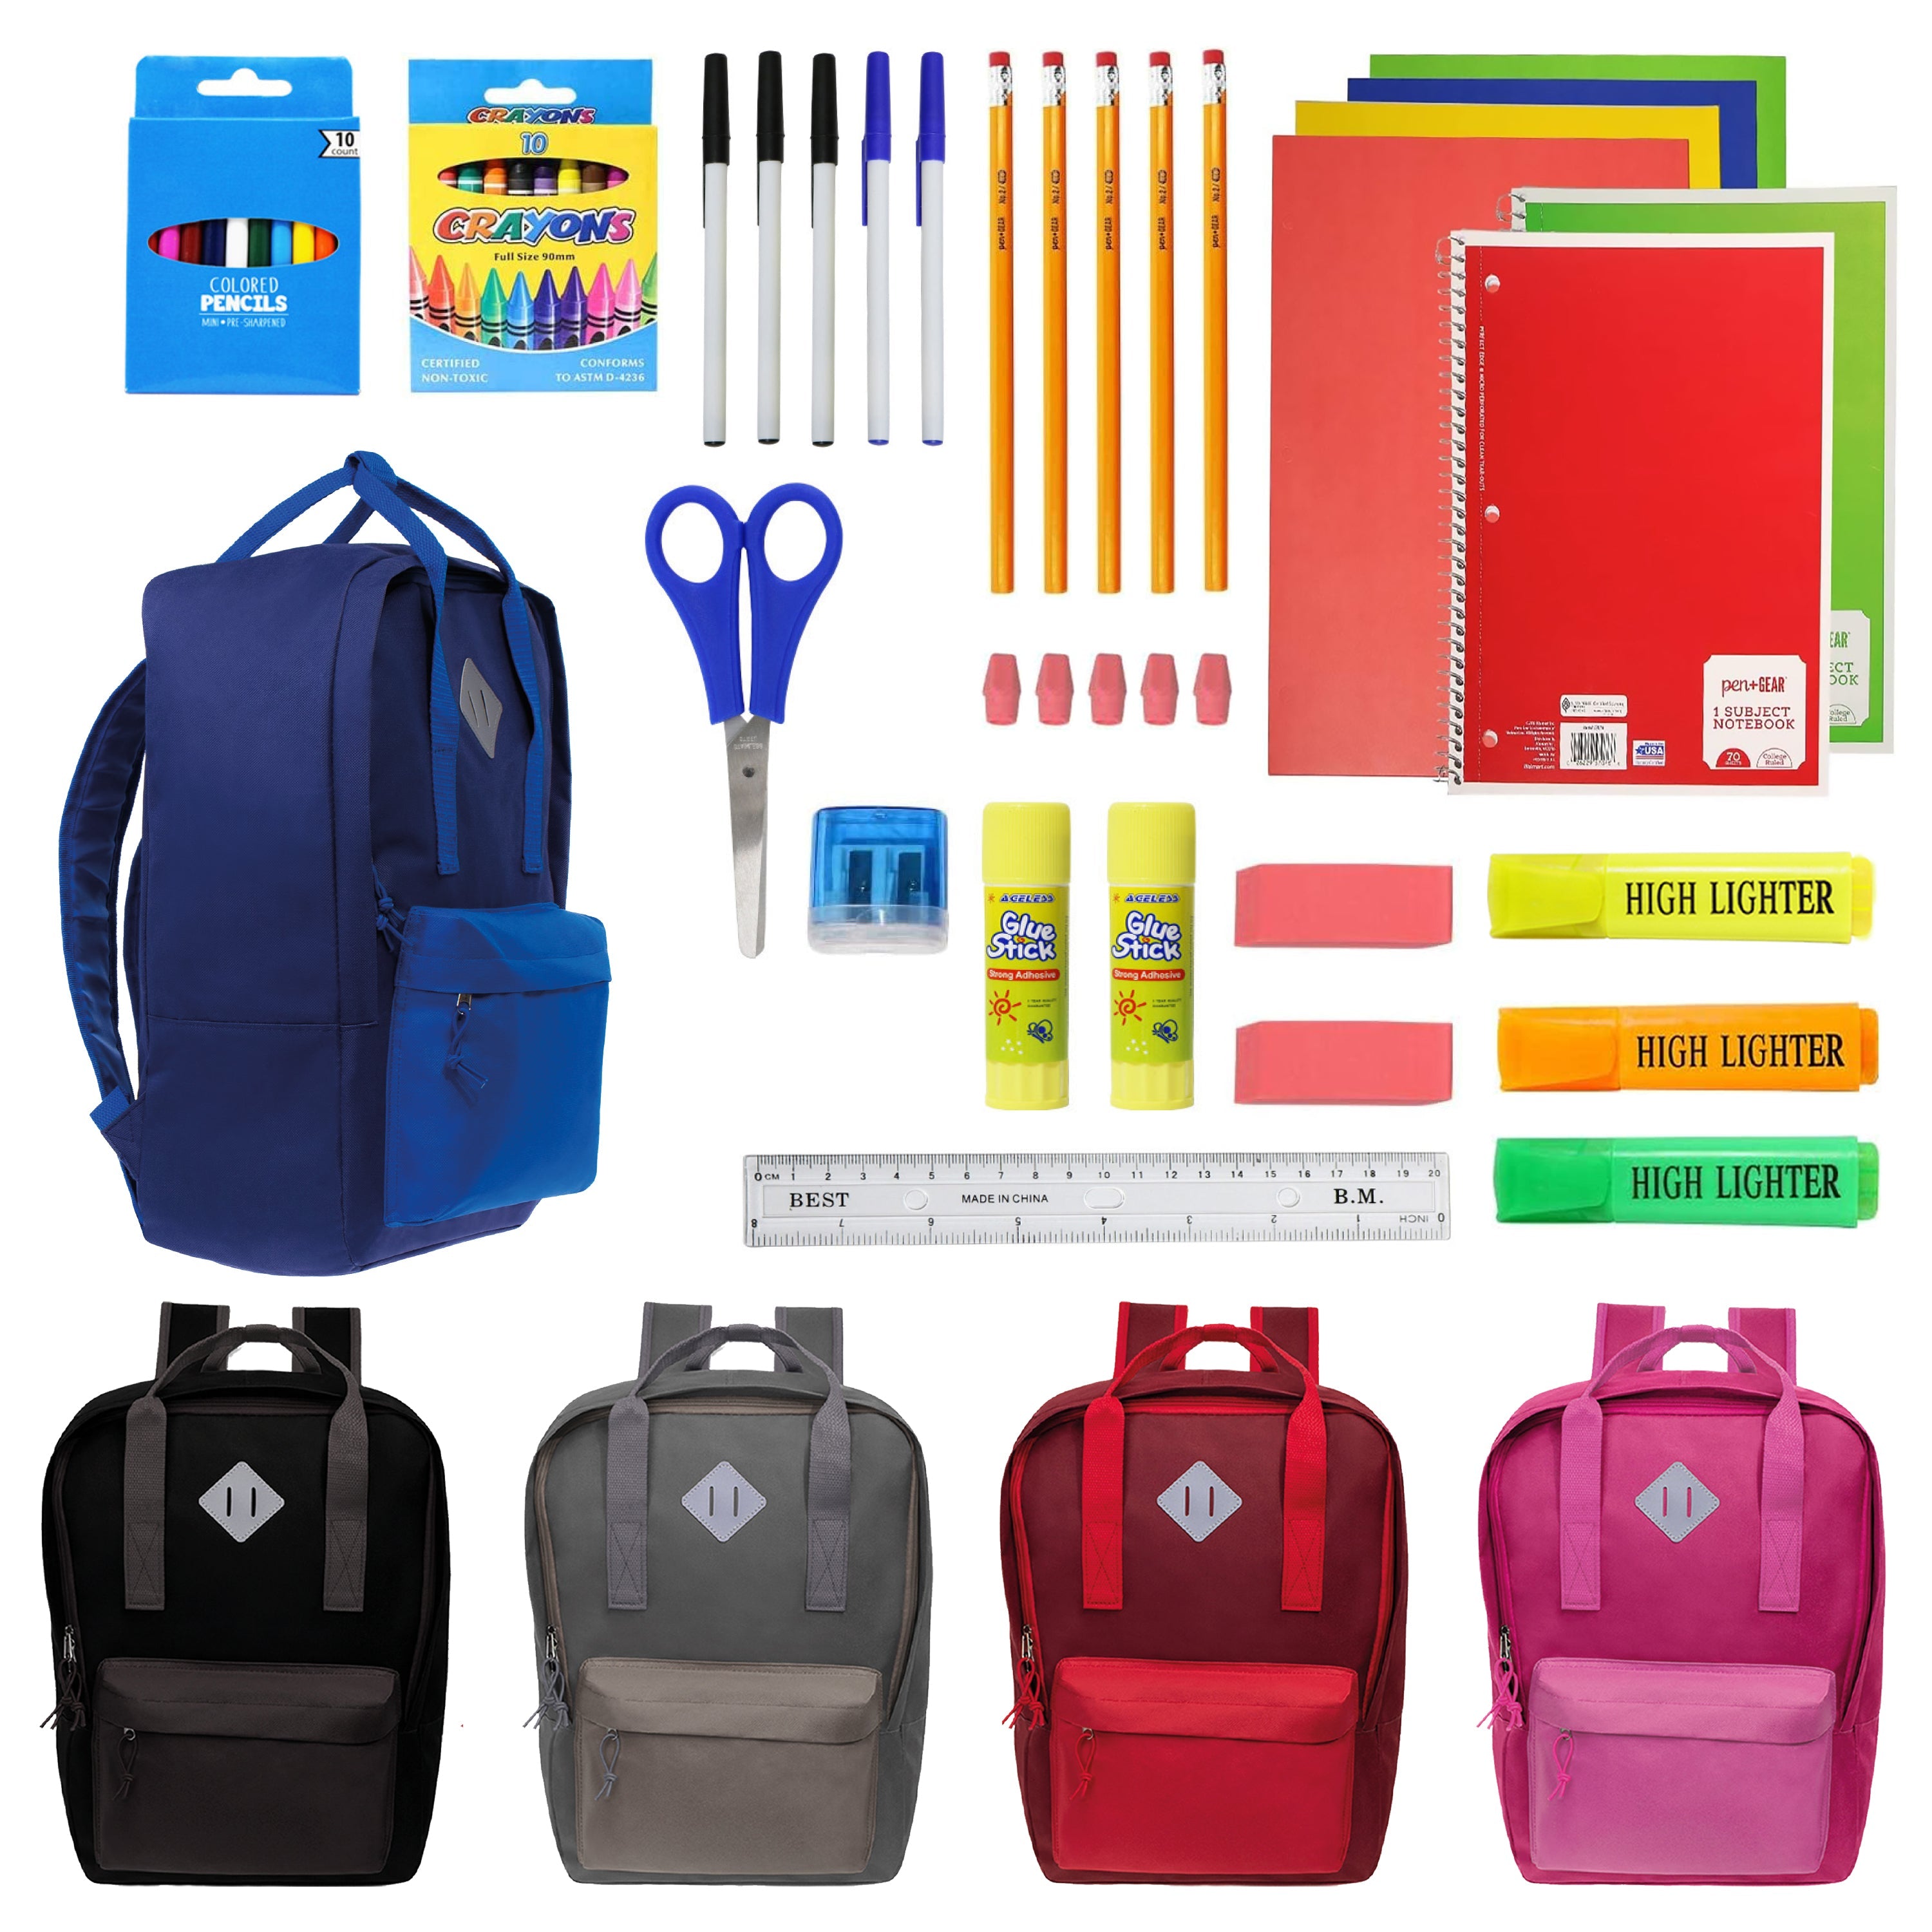 12 Multi Color Diamond Patch 17" Wholesale Backpacks and 12 Bulk School Supply Kits of Your Choice